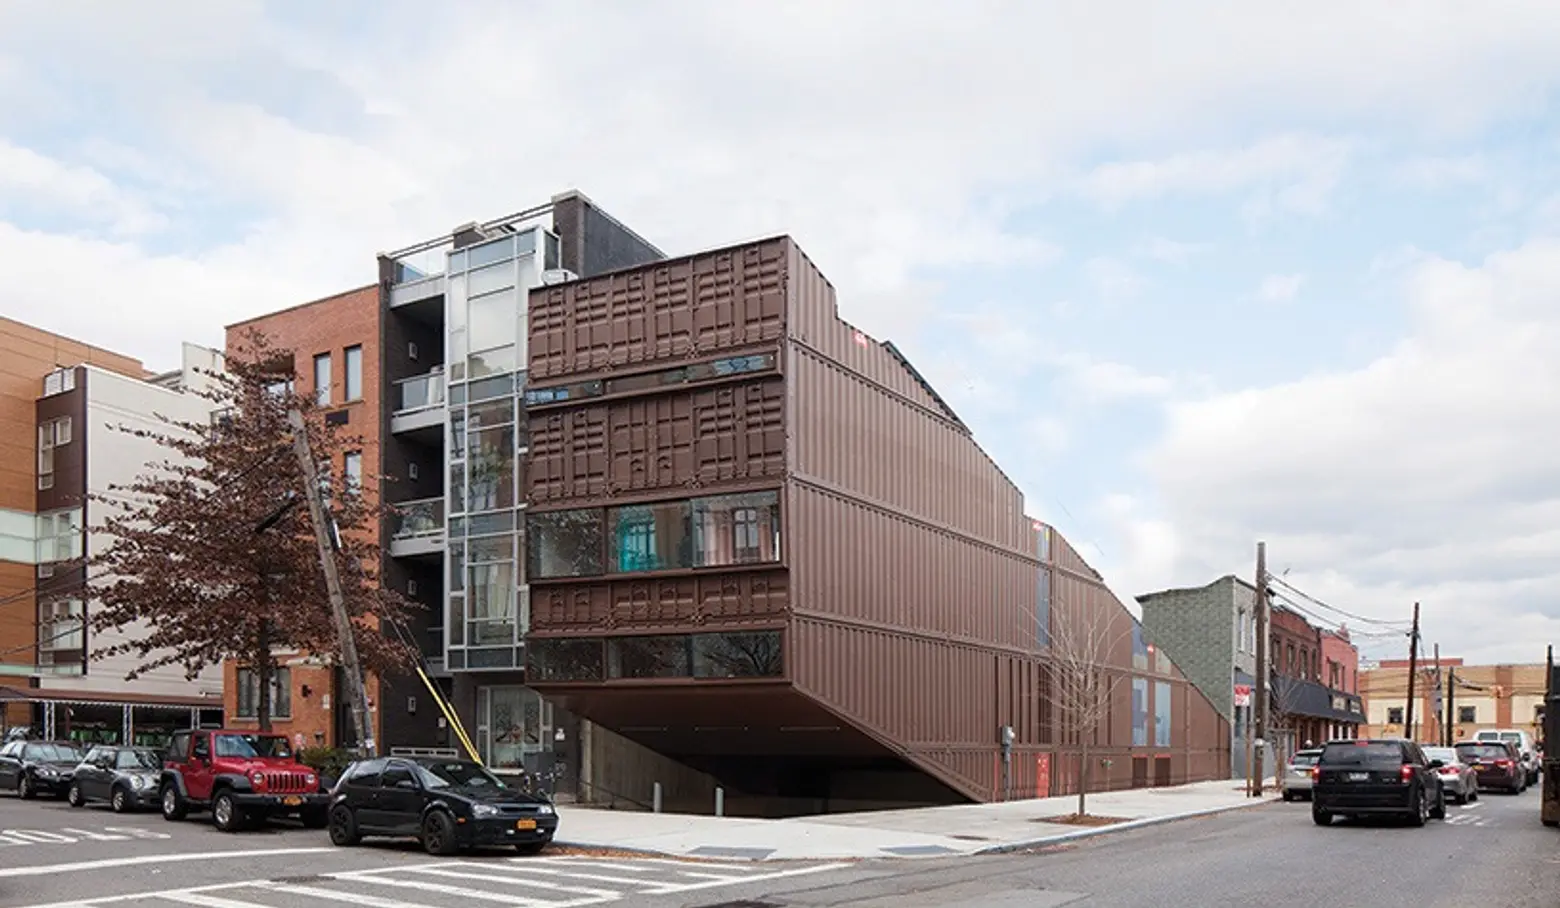 LOT-EK erects a stunning single-family mega-home from 21 shipping containers in Williamsburg